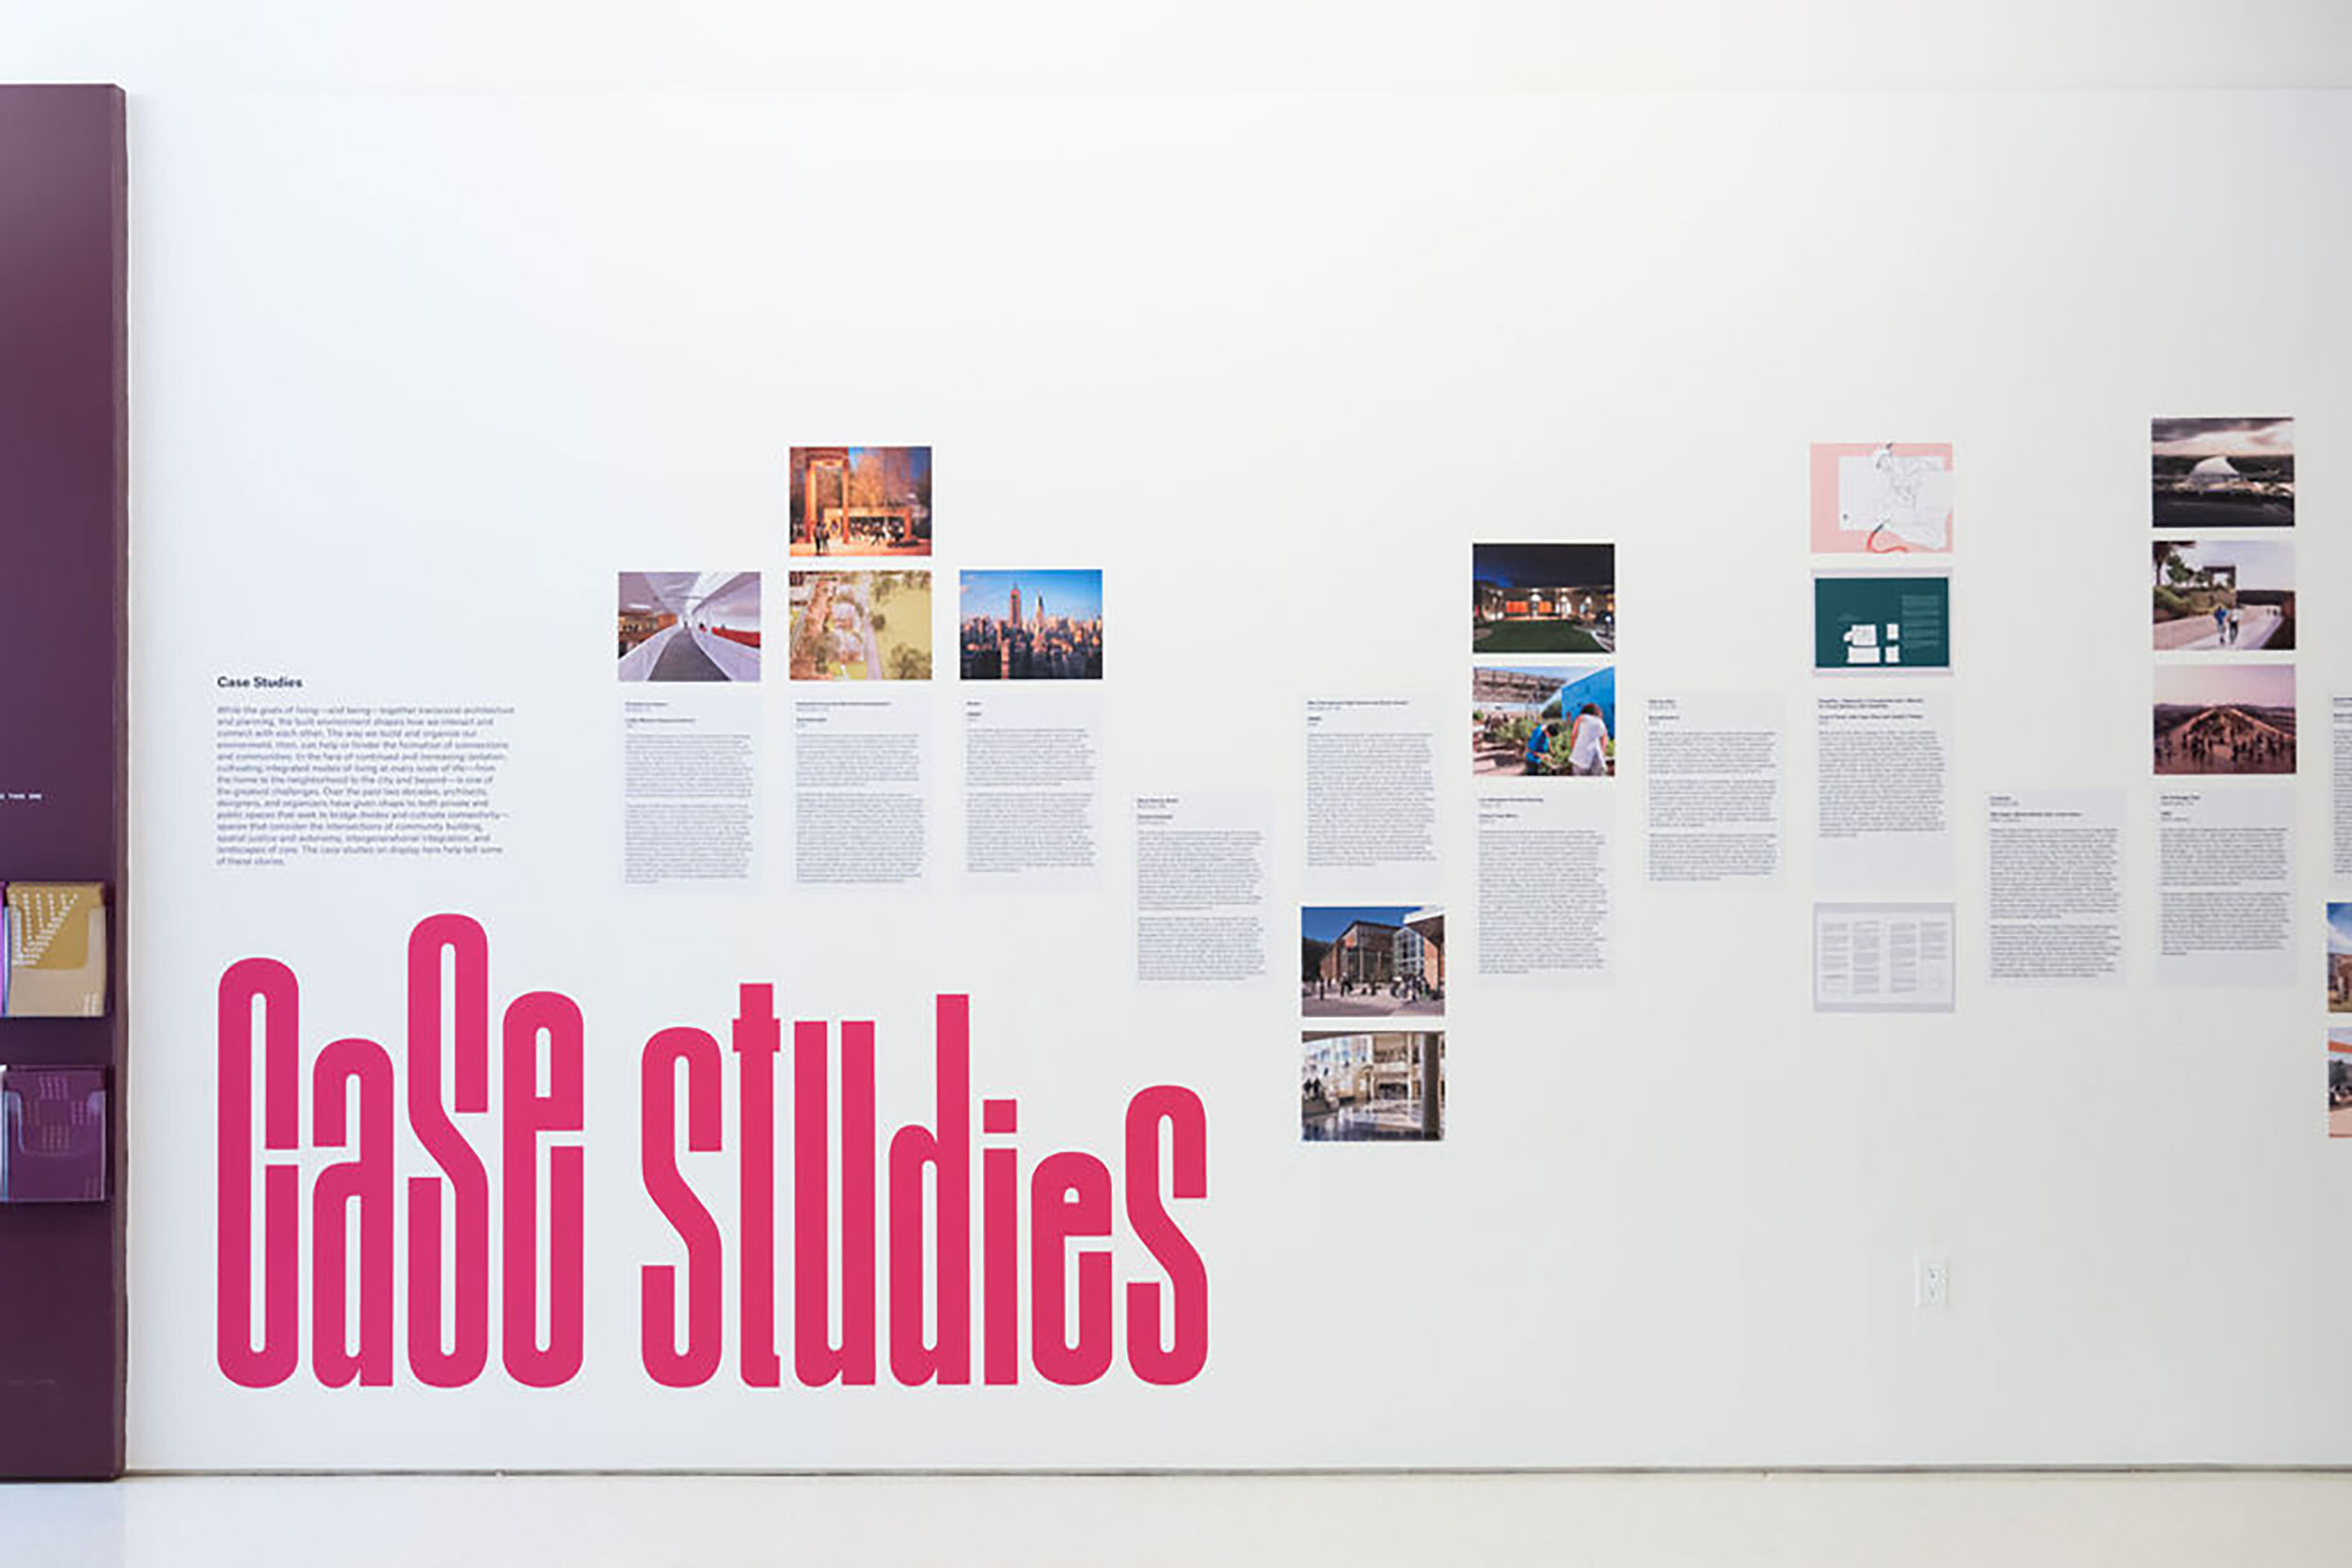 Installation view of a white gallery wall with images and text spanning across the middle of the wall horizontally.